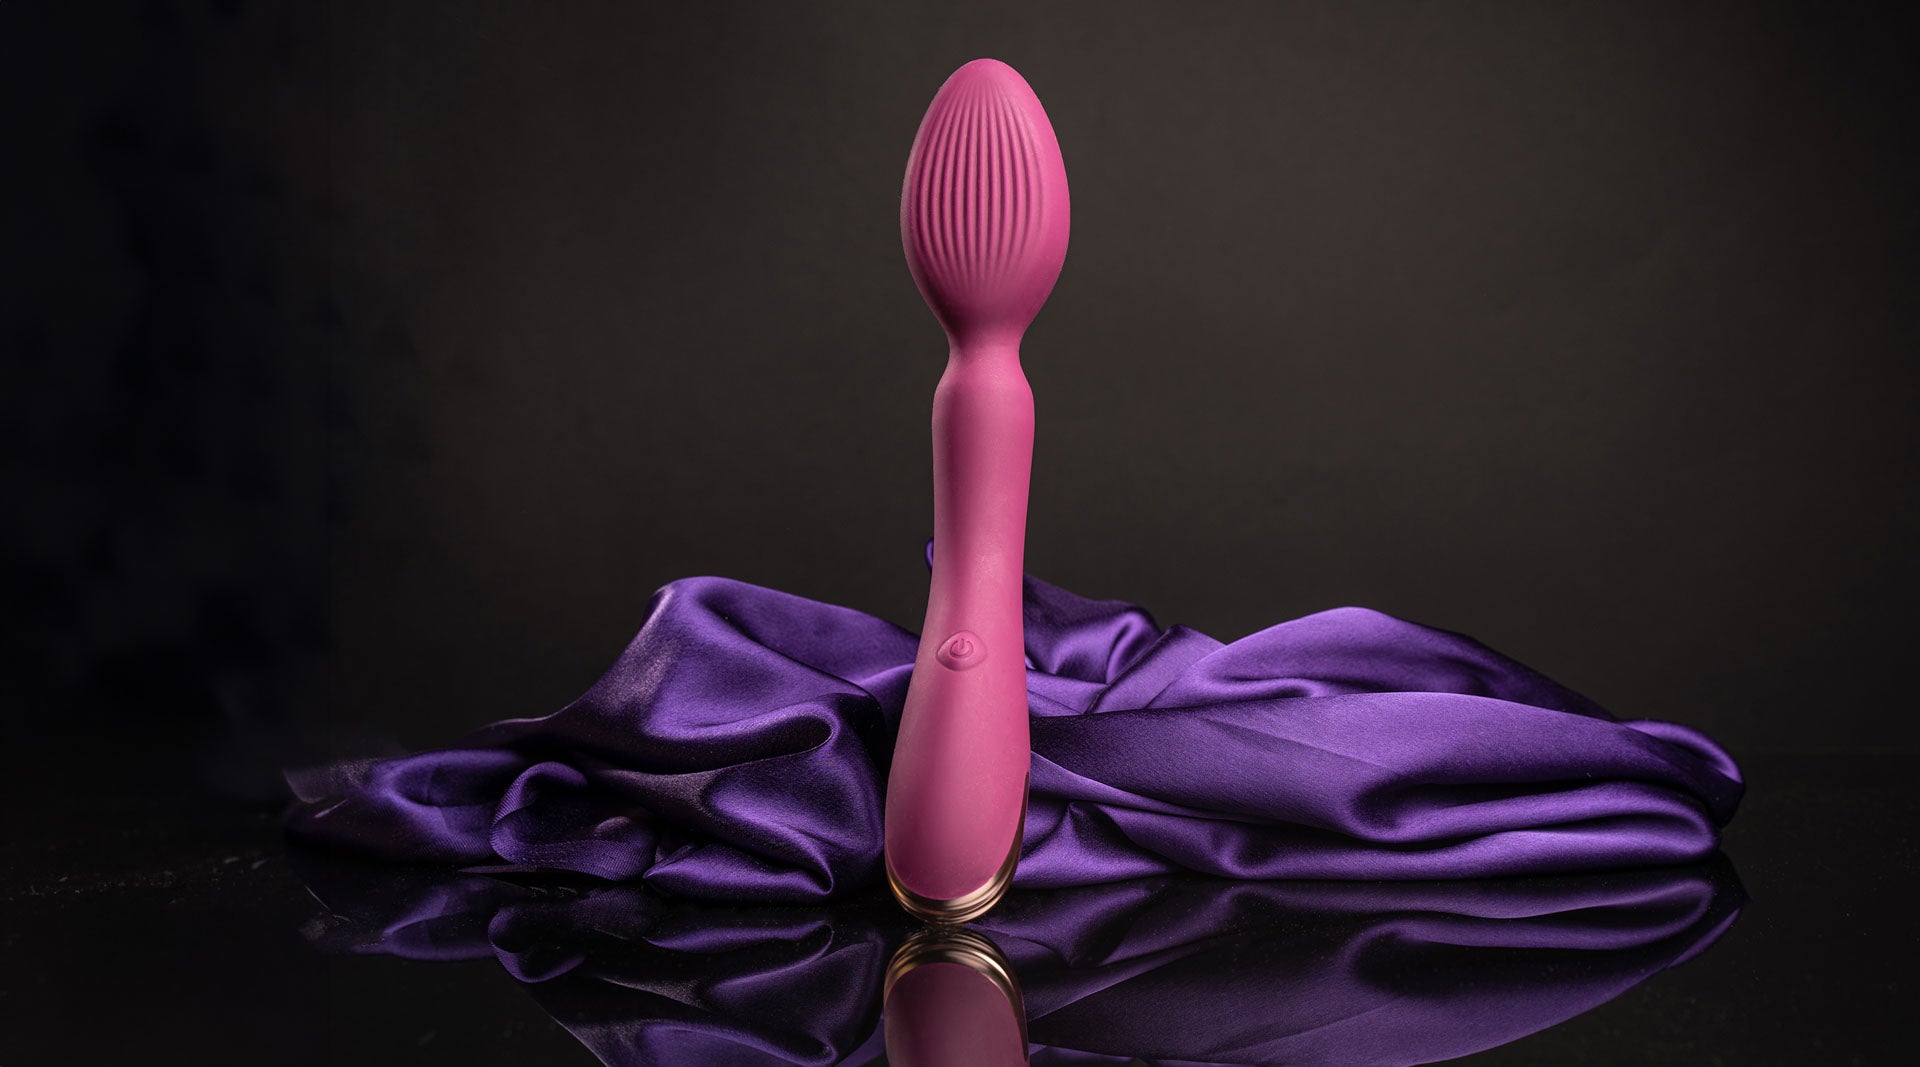 Burgundy egged shaped head wand vibrator with a ribbed surface.